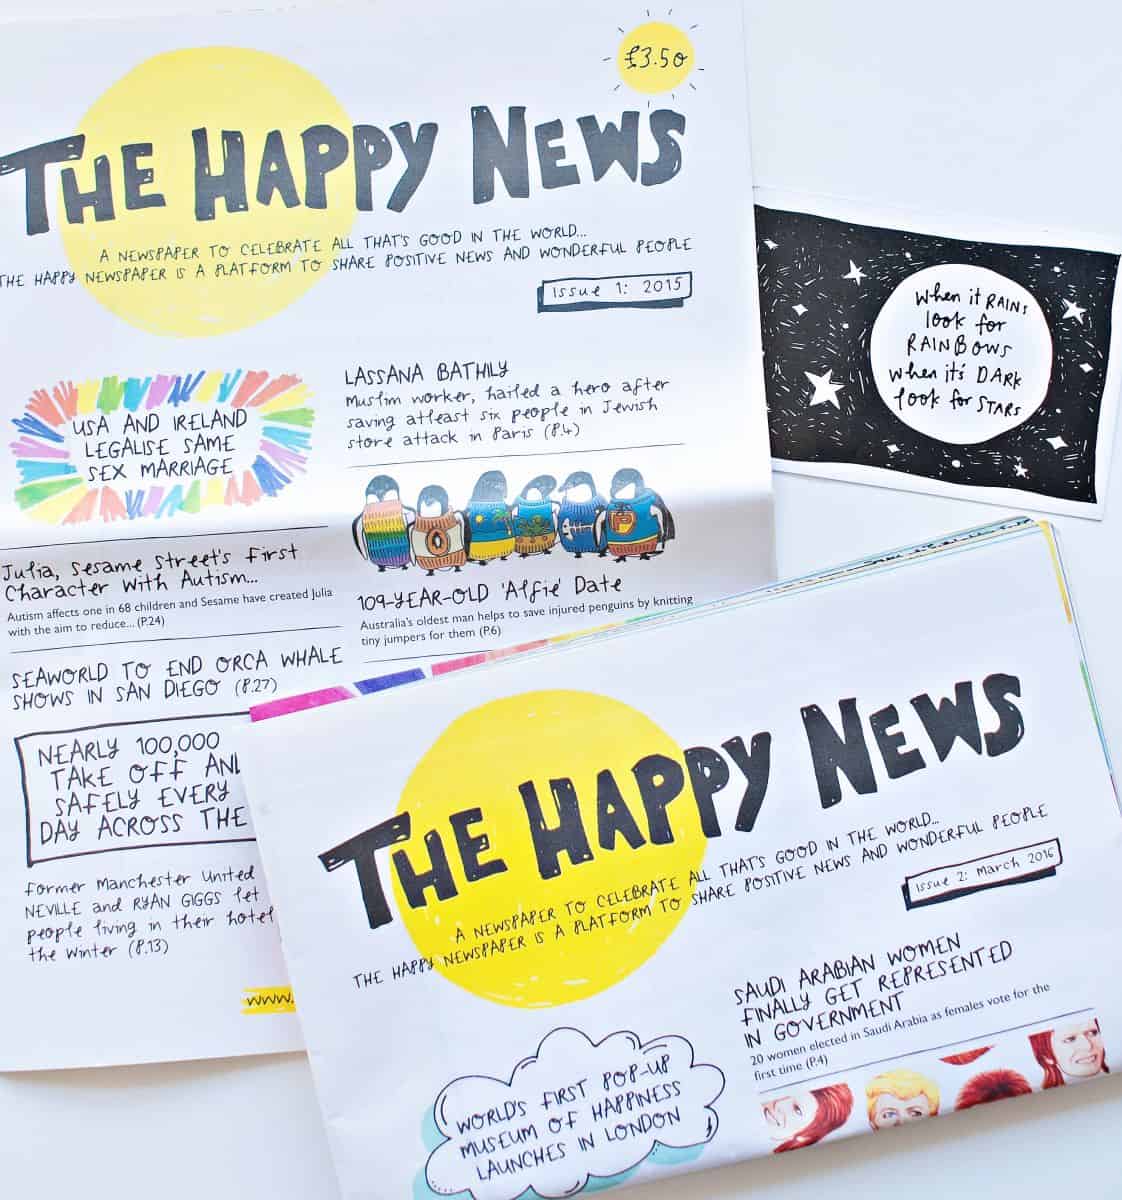 THE HAPPY NEWSPAPER IS A FUN WAY TO SHARE POSITIVE NEWS AROUND THE WORLD